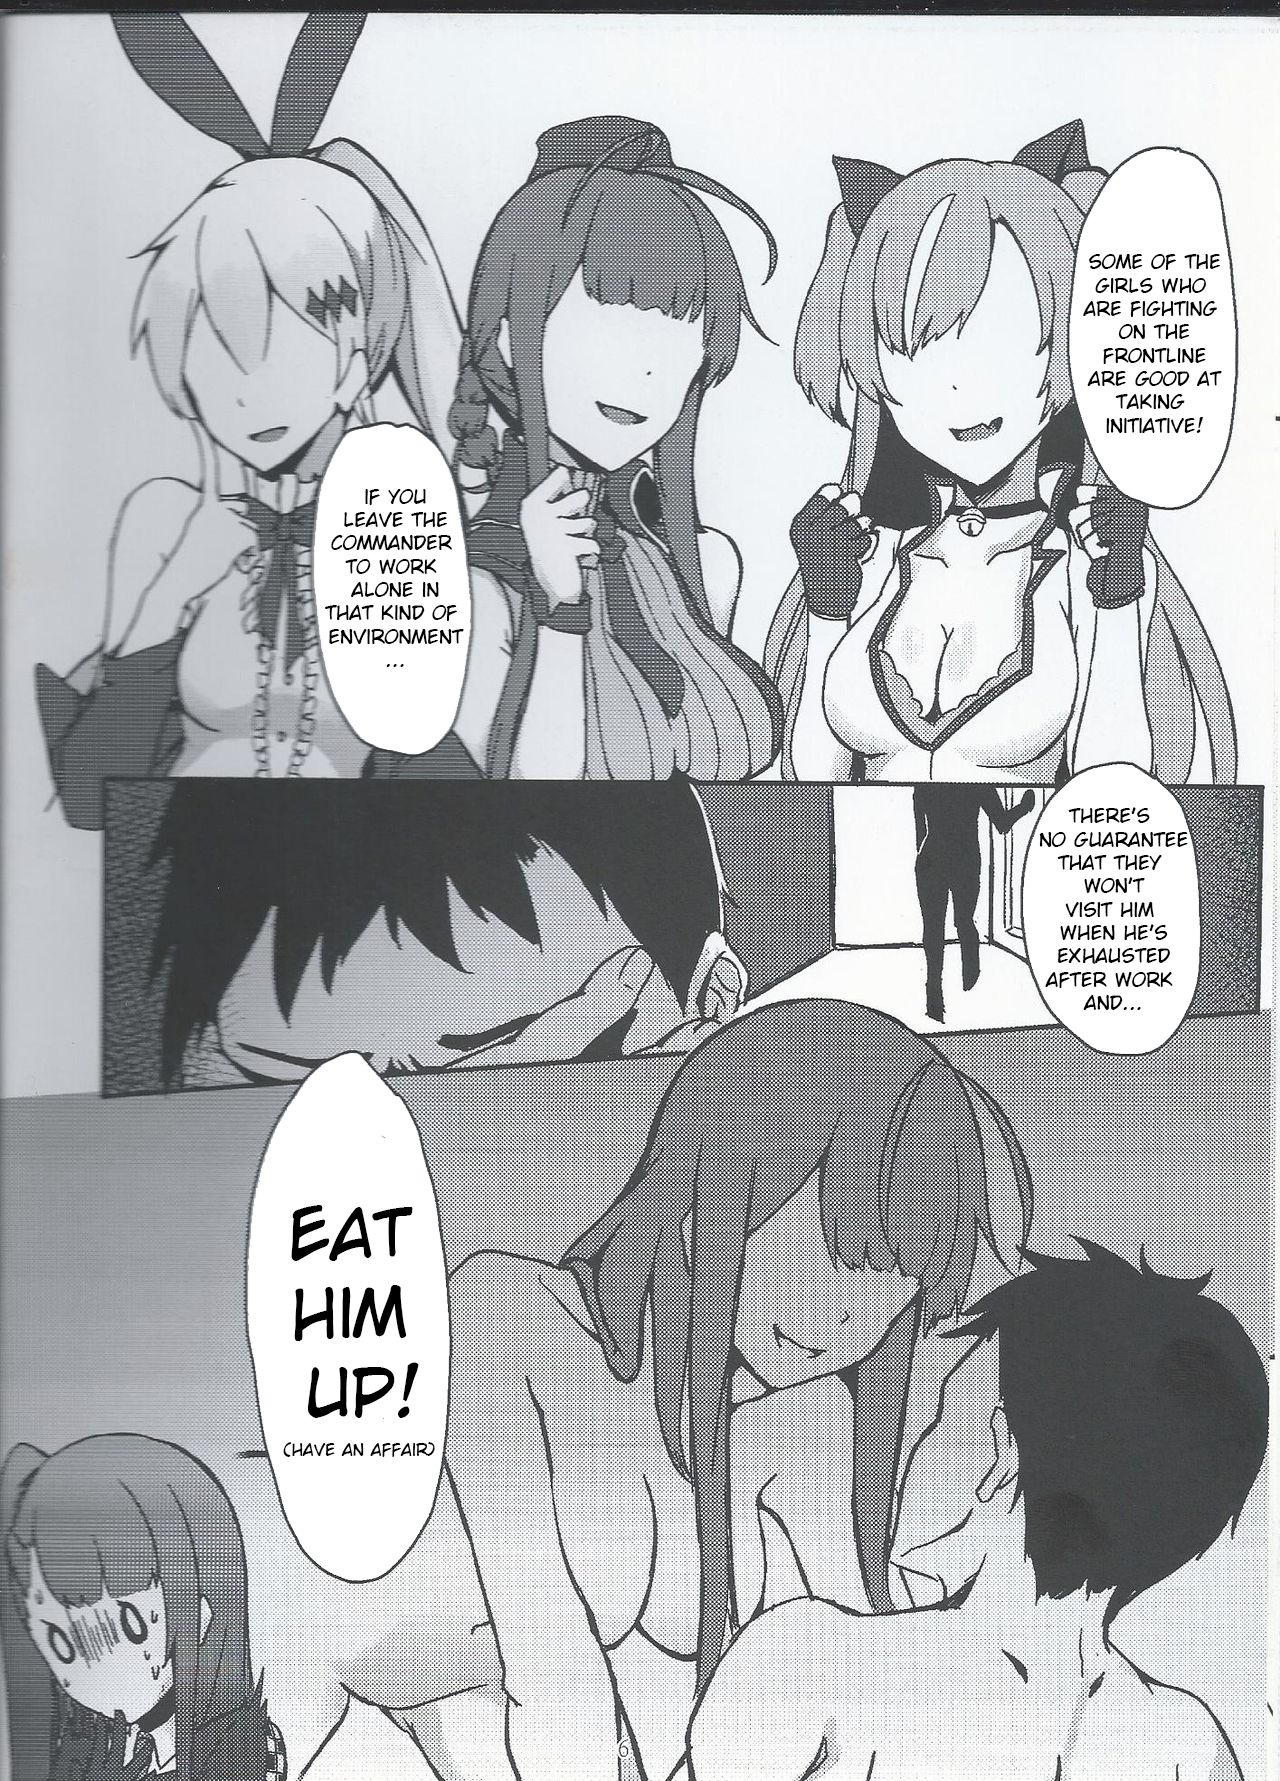 (FF32) [Sumi (九曜)] I don't know what to title this book, but anyway it's about WA2000 (Girls Frontline) [English] page 5 full